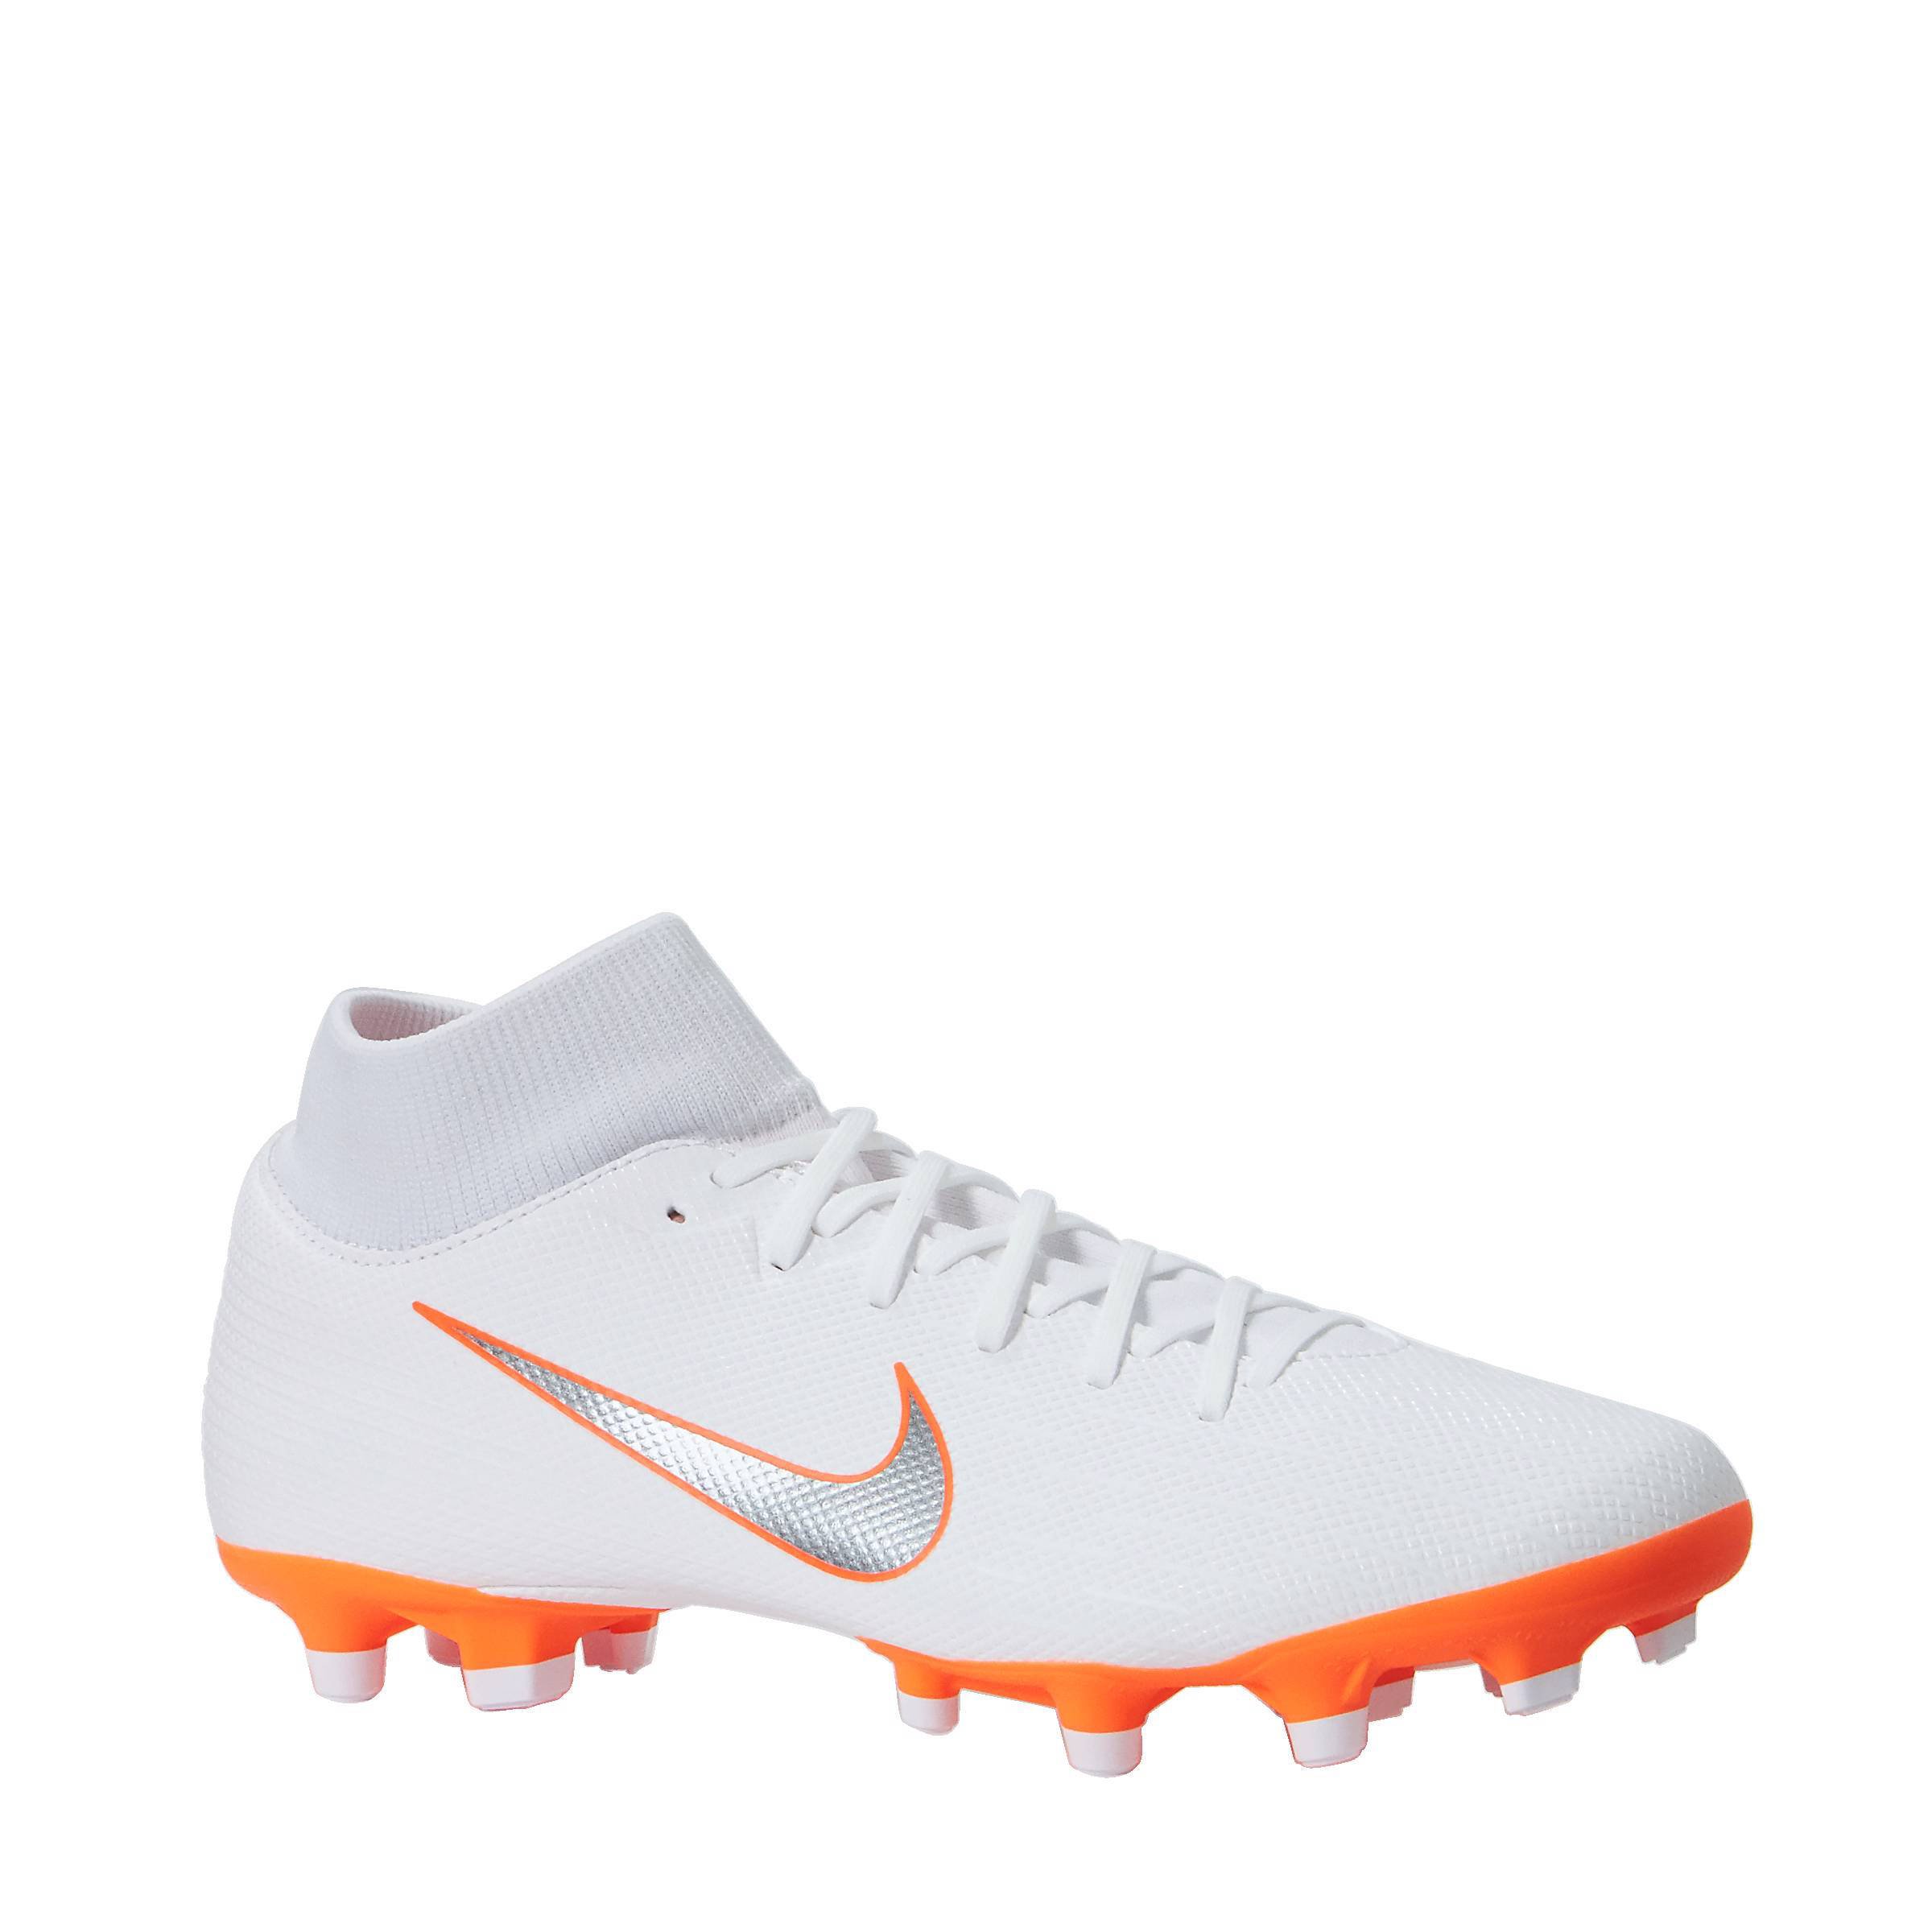 Nike Mercurial Superfly 6 Elite FG ACC Soccer Cleats BOOTS.